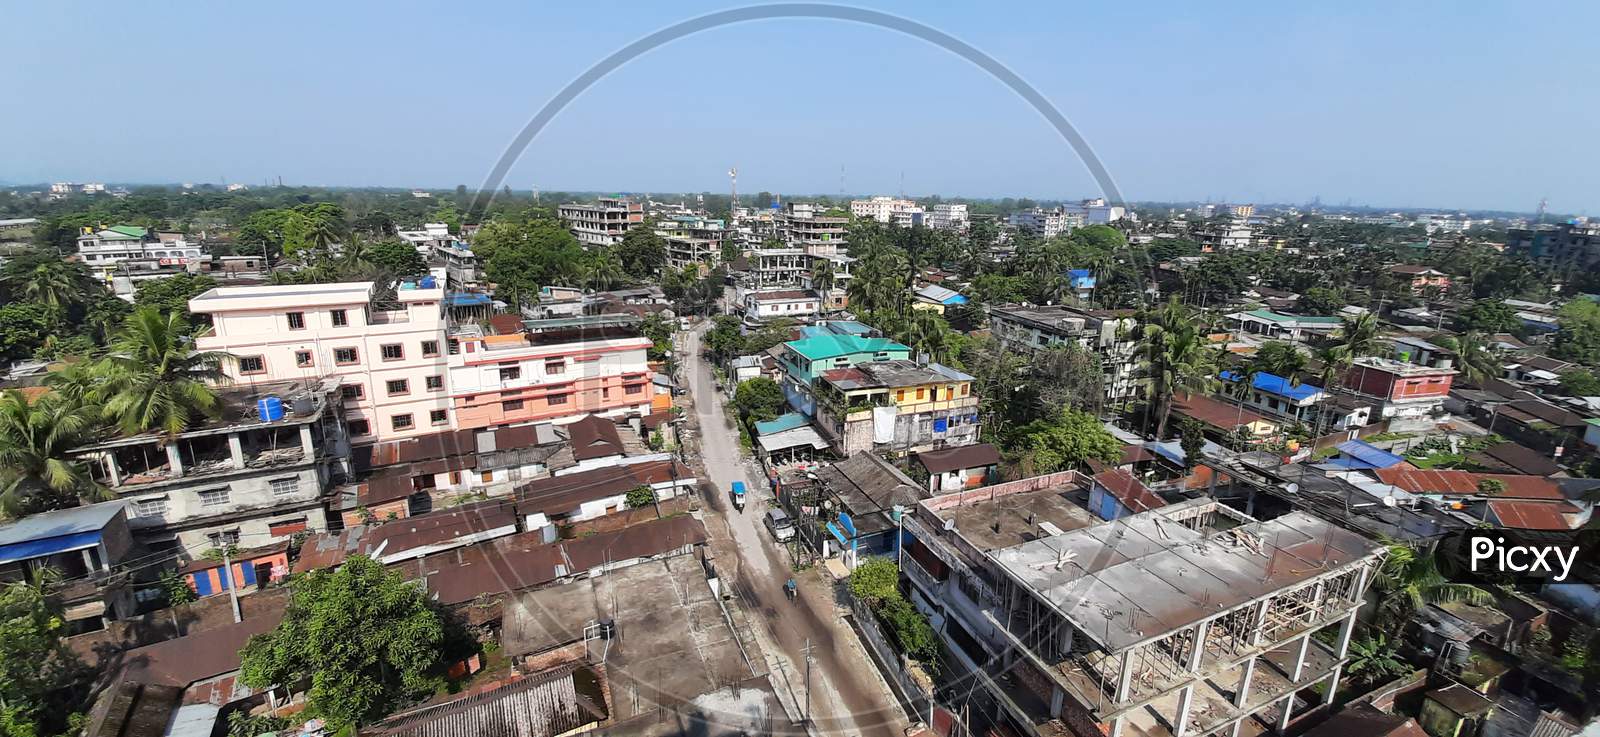 Landscape view of developing Bongaigaon Township from the Brindaban Garden, a  Flat/Real Estate Complex/Housing Complex which is the highest height Flat complex or building in Bongaigaon Township.